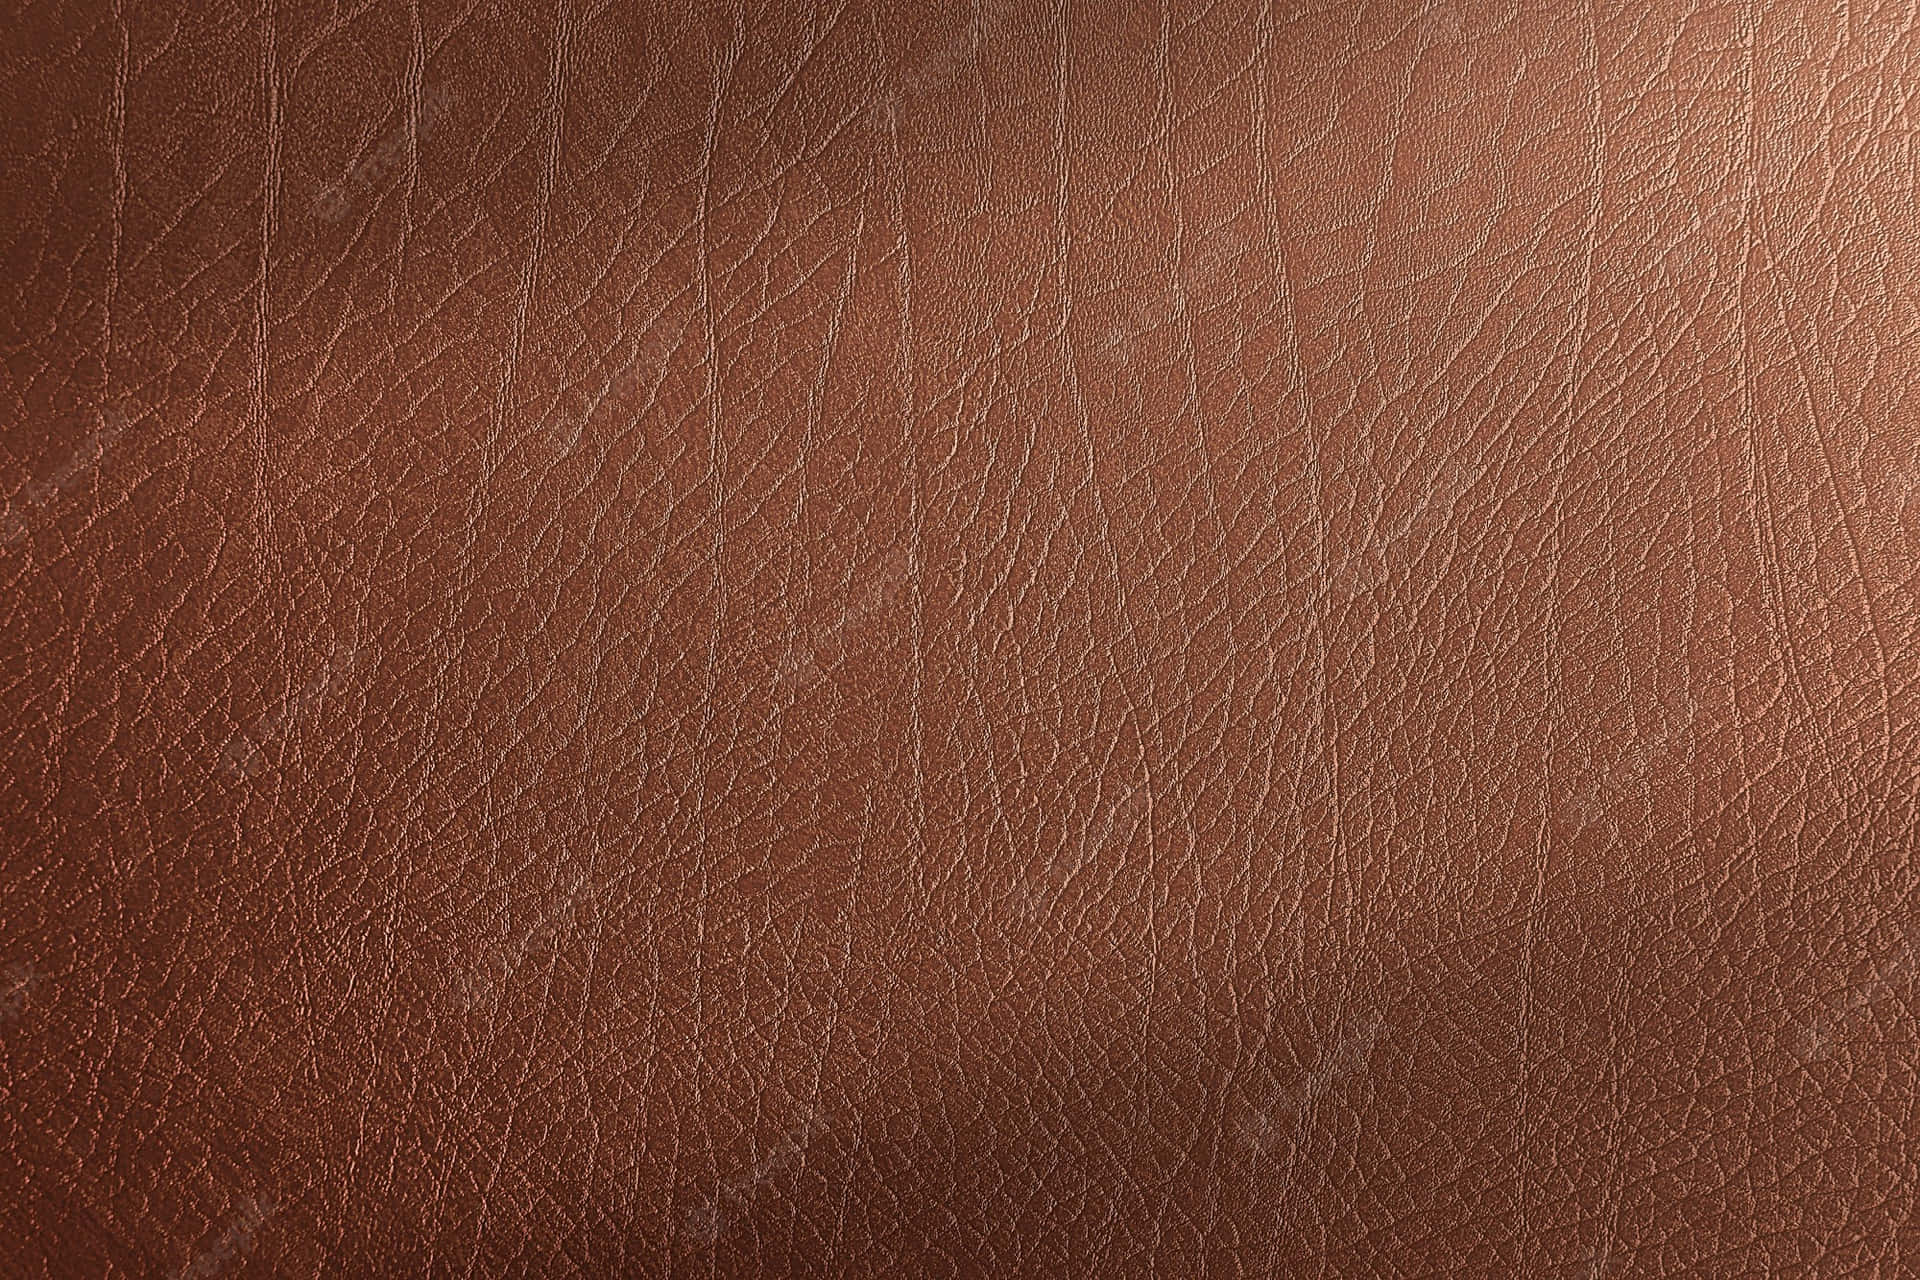 Brown Leather Texture Zoomed In Wallpaper